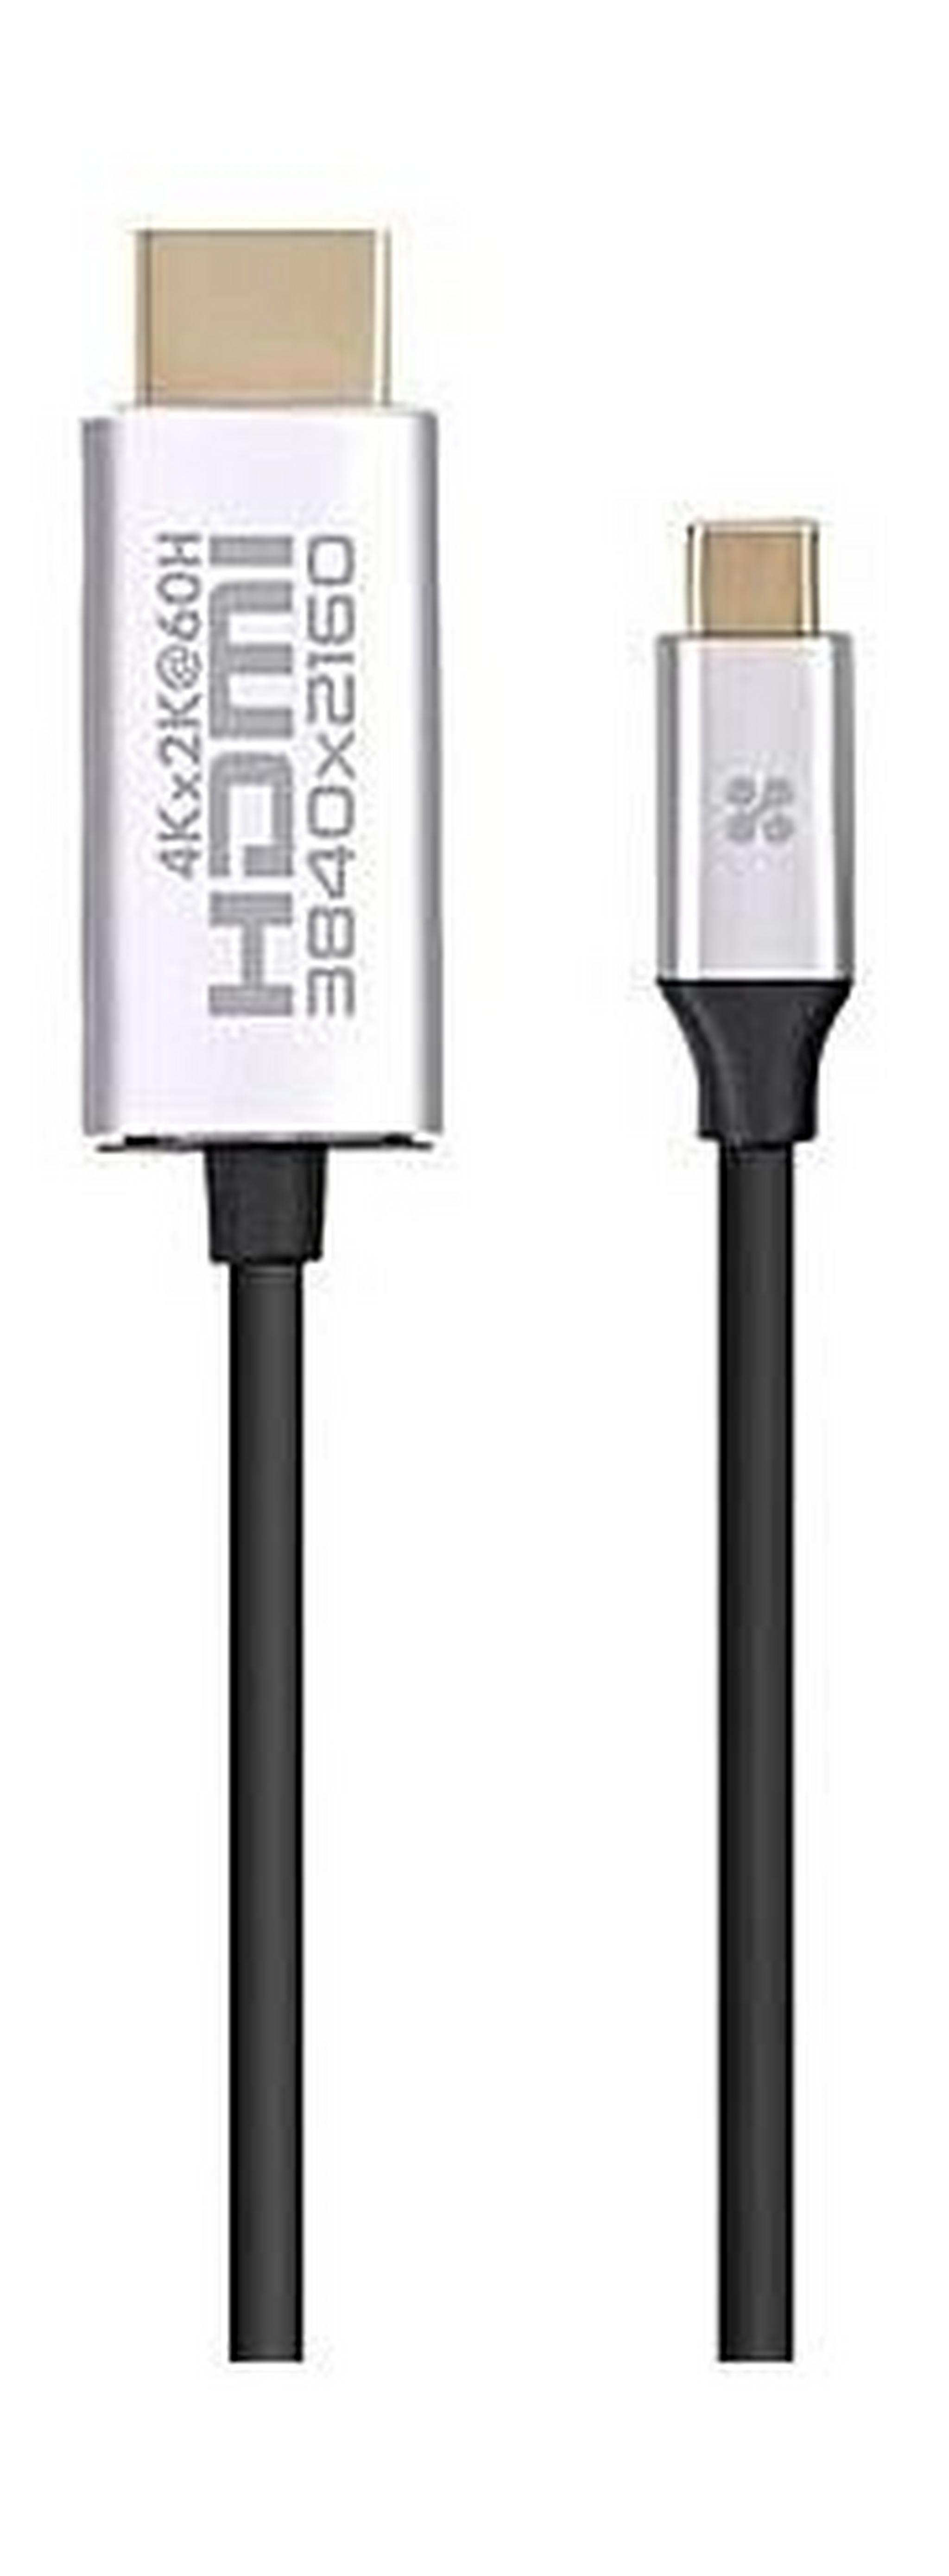 Promate USB-C to HDMI Audio Video Cable 1.8-Meters - Grey